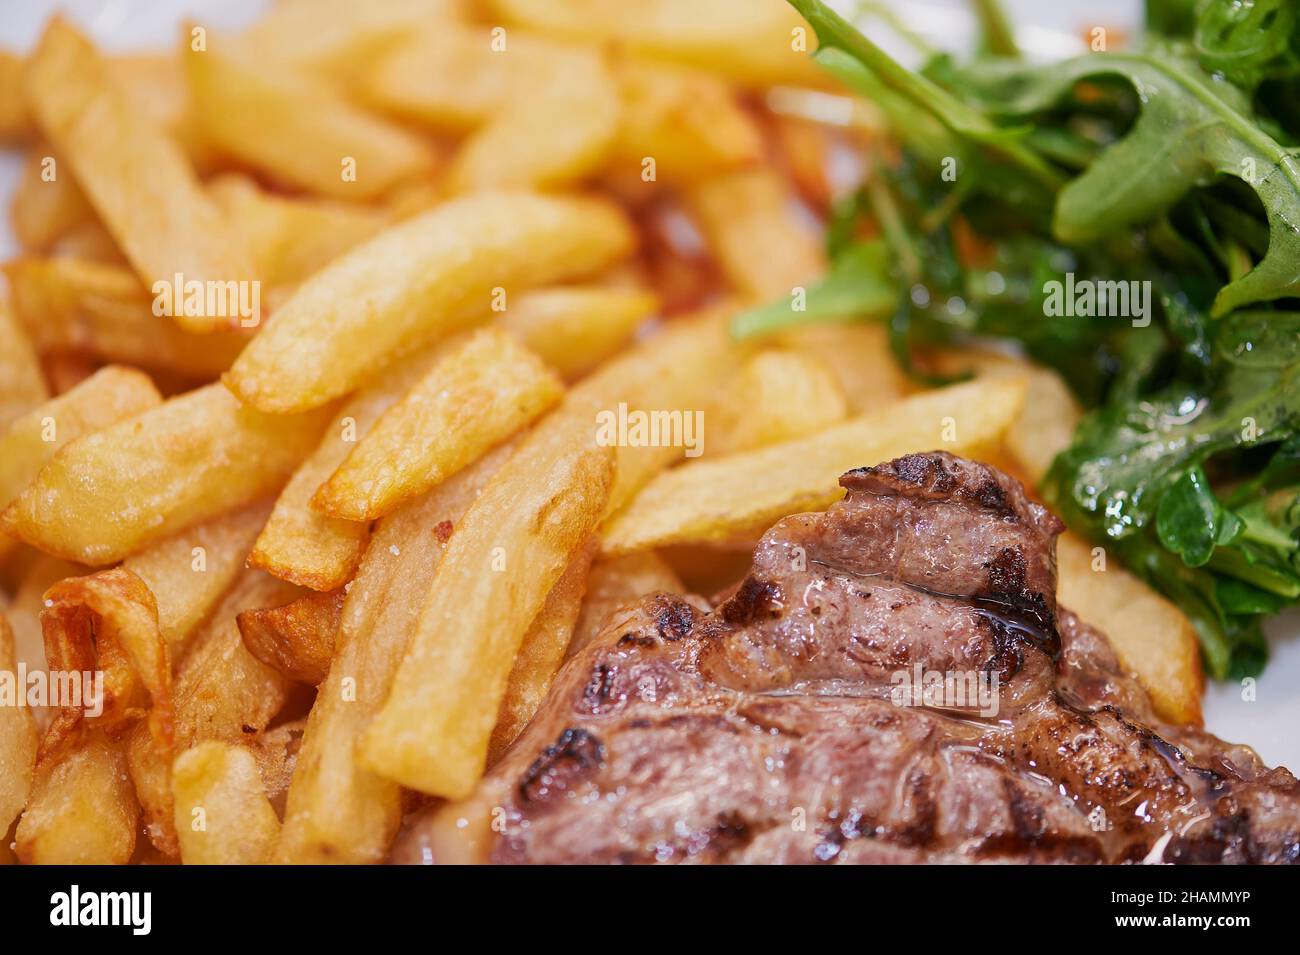 Steak and French fries Stock Photo